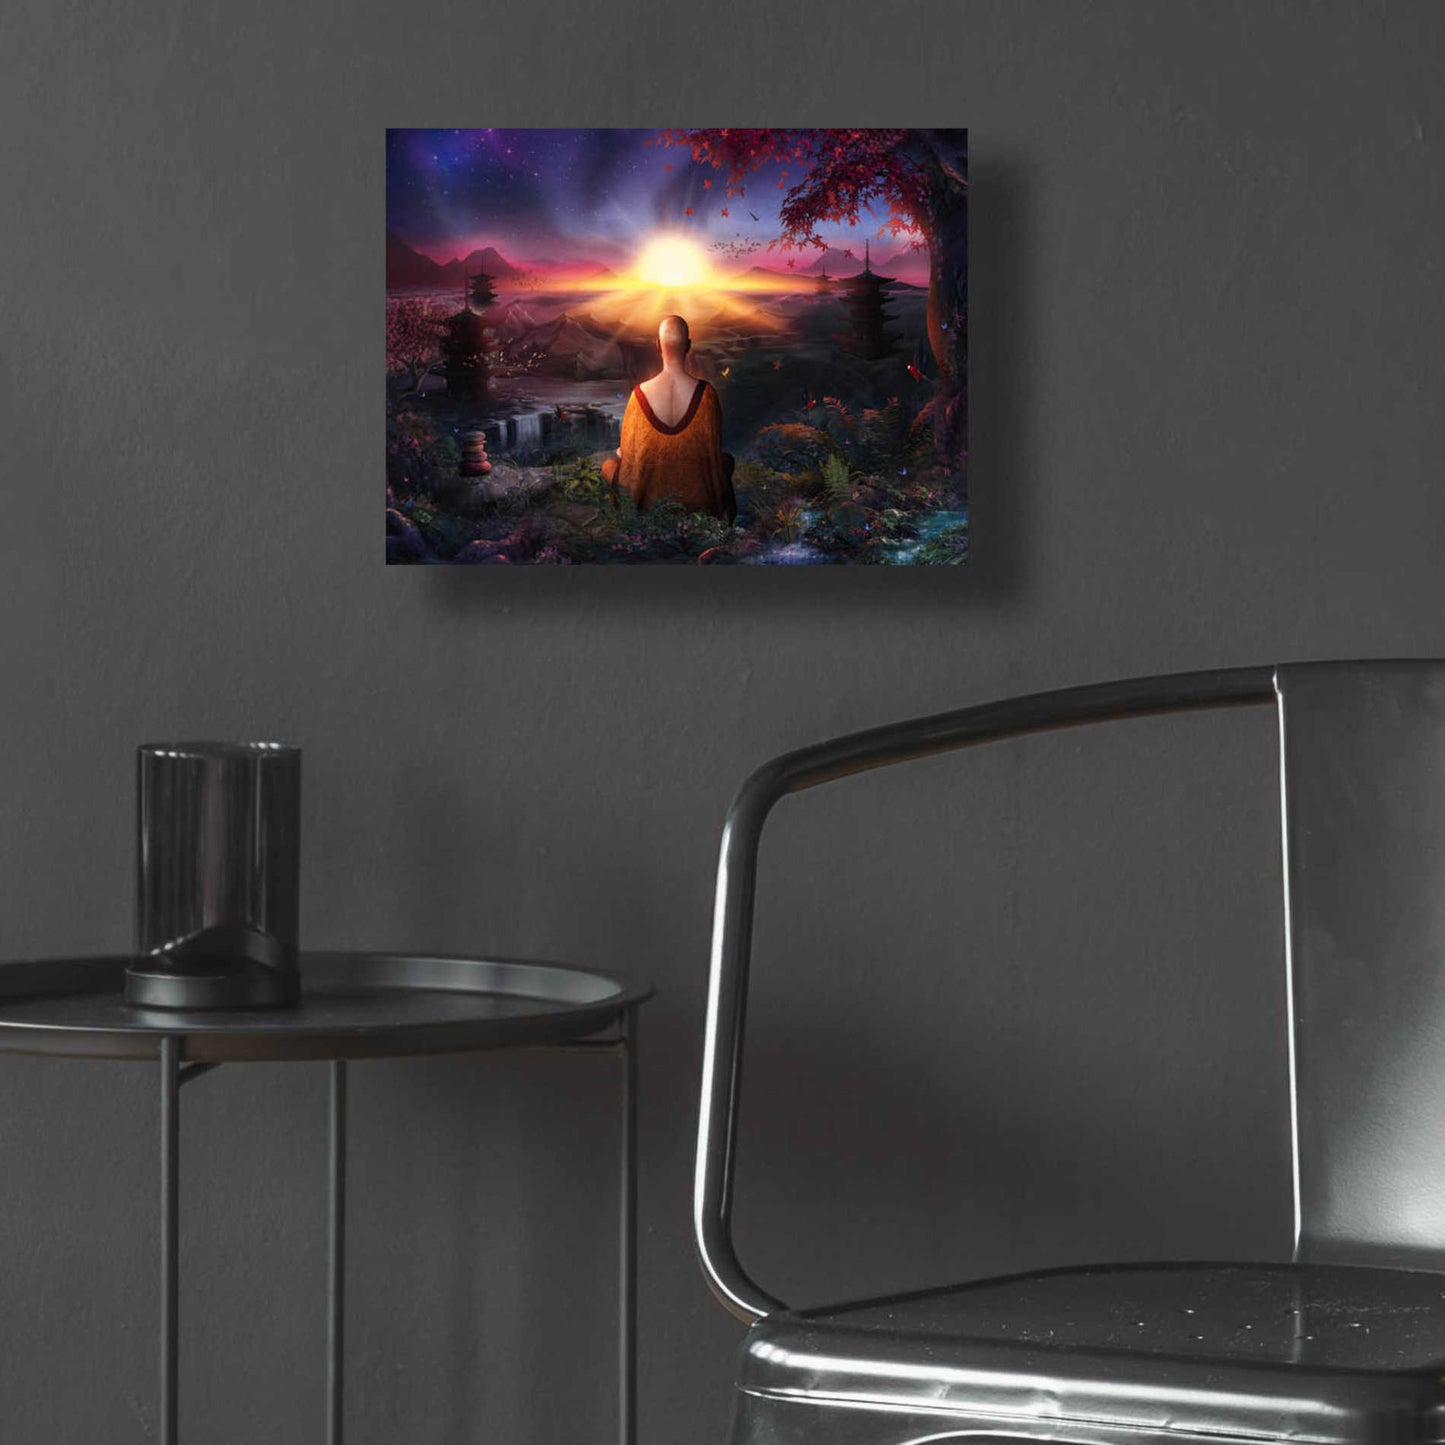 Epic Art 'A Magical Existence' by Cameron Gray Acrylic Glass Wall Art,16x12